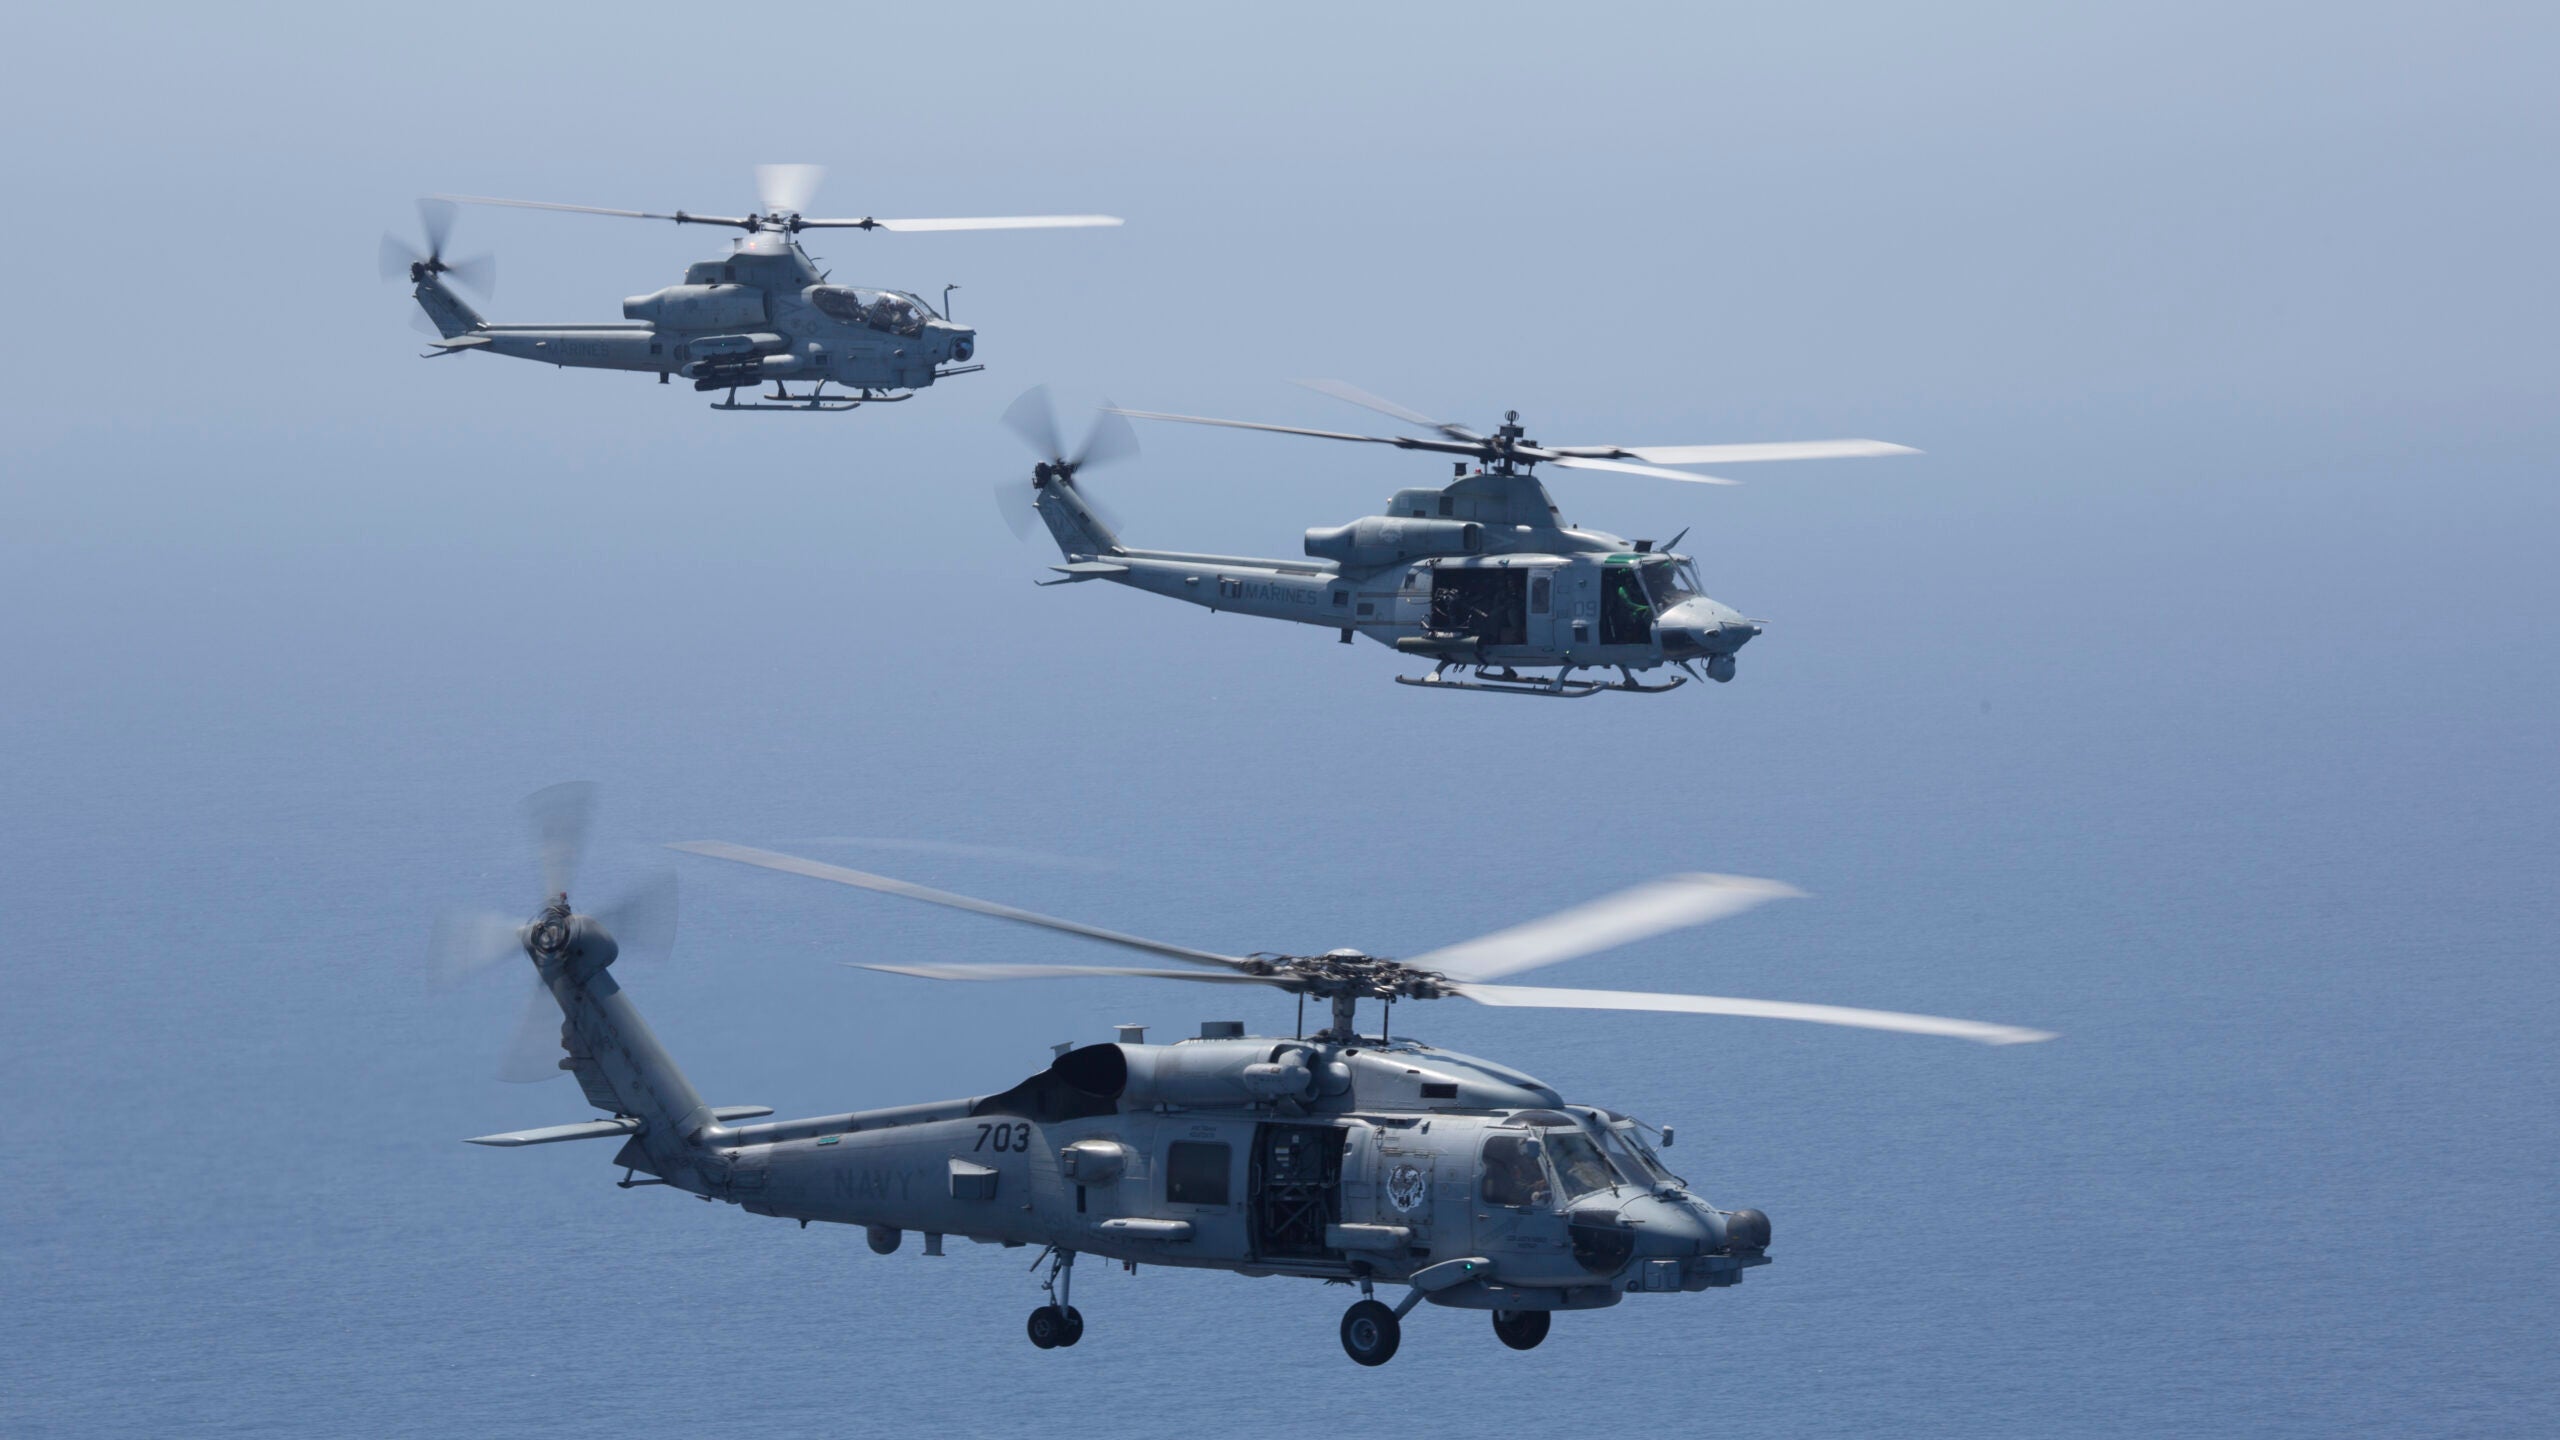 U.S. Marine Corps aircraft from Marine Light Attack Helicopter Squadron (HMLA) 267, and HMLA-369, Marine Aircraft Group 39, 3rd Marine Aircraft Wing (MAW), drop sonobouys to receive signals from a submarine in the Pacific Ocean, July 20, 2021. 3rd MAW focuses on rapidly establishing forward operating bases across a broad area from which they can conduct various missions and then disestablishing them just as quickly, relocating, and repeating the process elsewhere; to include anti-submarine warfare. Summer Fury is an exercise conducted by 3rd MAW in order to maintain and build capability, strength and trust within its units to generate the readiness and lethality needed to deter and defeat adversaries during combat operations as the U.S. Marine Corps refines tactics and equipment in accordance with Force Design 2030. (U.S. Marine Corps photo by Lance Cpl. Rachaelanne Woodward)